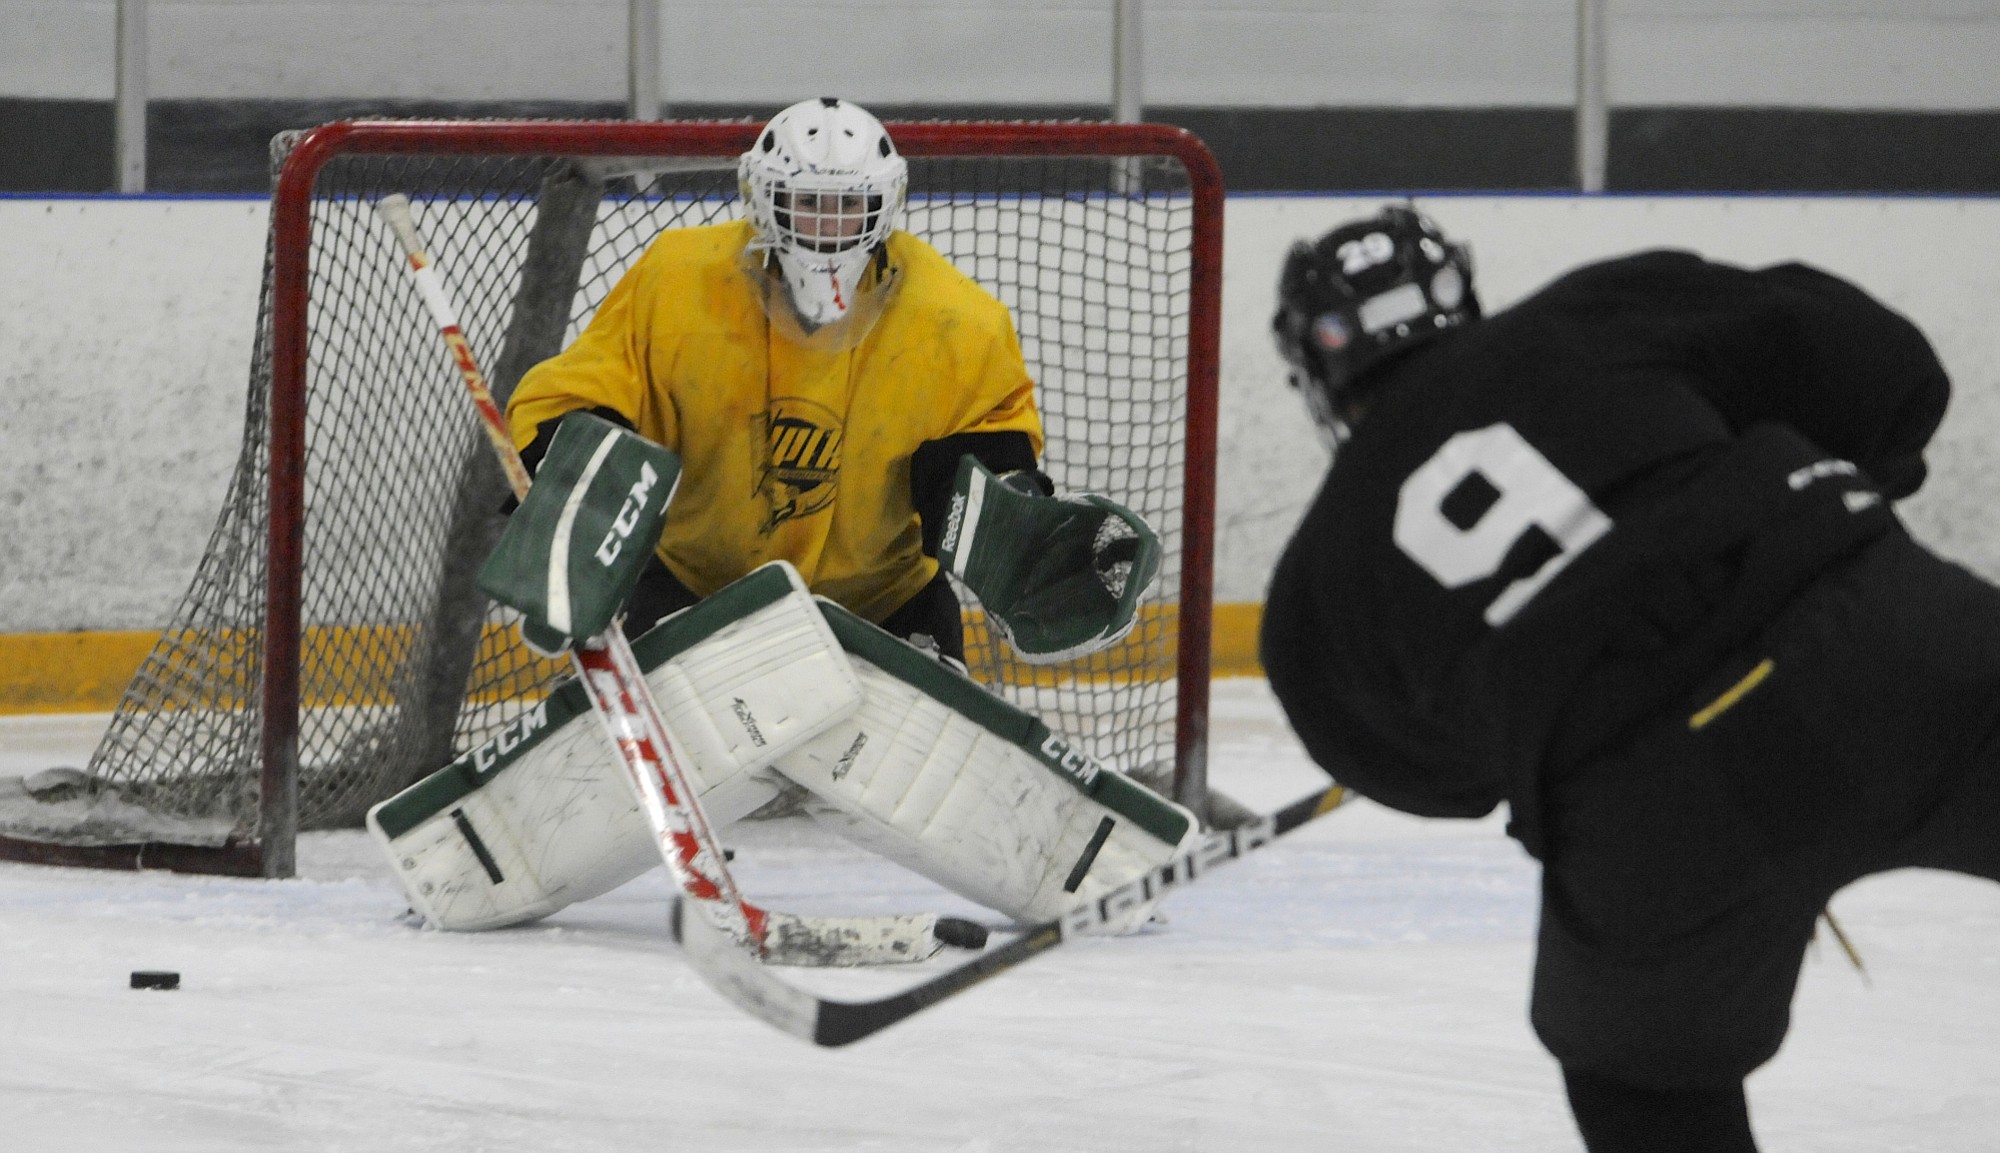 Fort Vancouver Vipers player Eric Bampenchow, right, takes a shot on goalie Brenden Leise during a practice at the Mountain View Ice Arena in Vancouver.